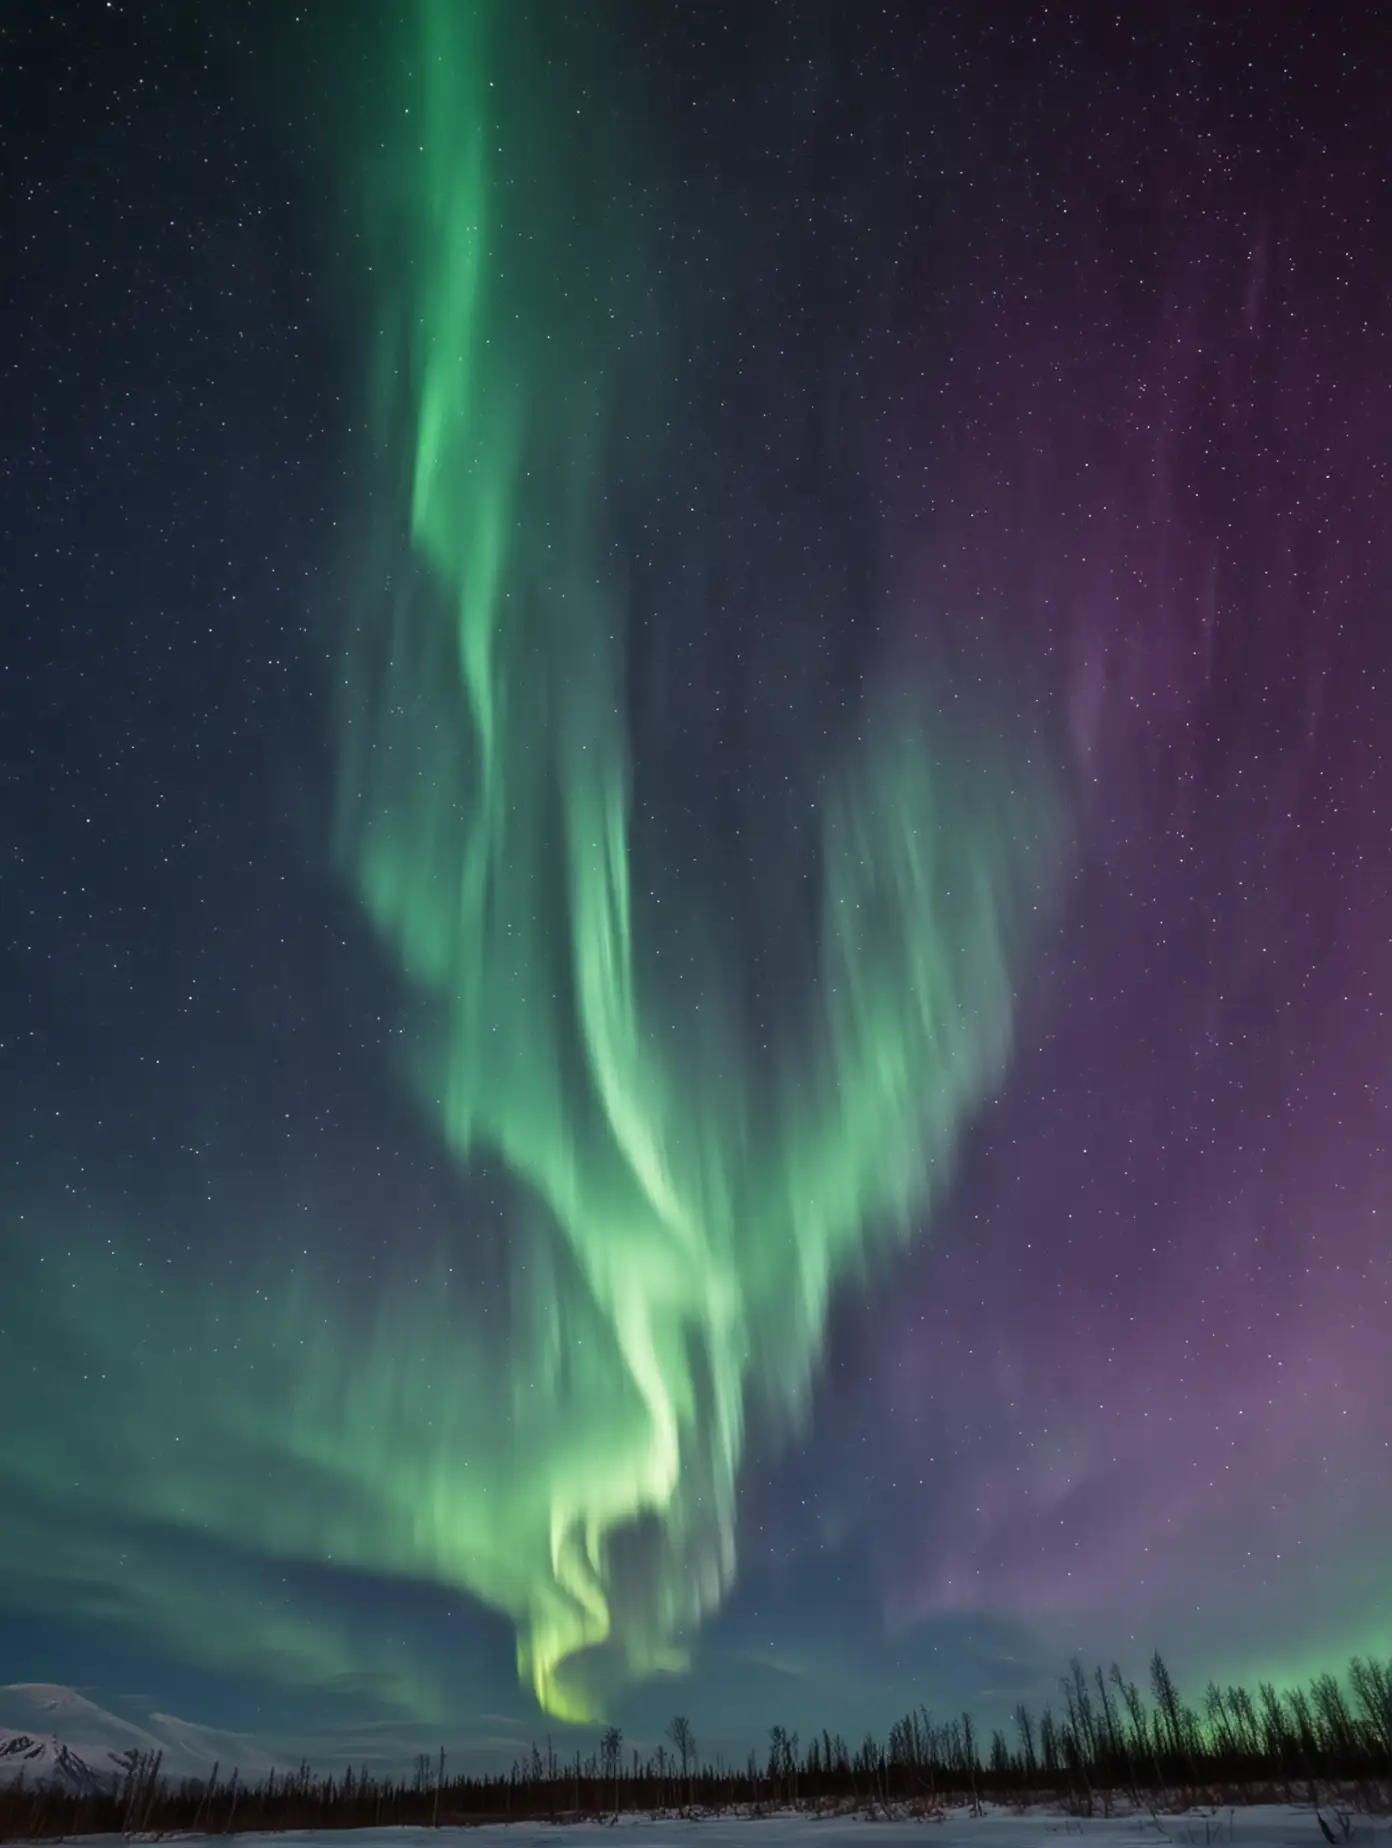 Vibrant Northern Lights in Sky with Stars Celestial Aurora Borealis Photography